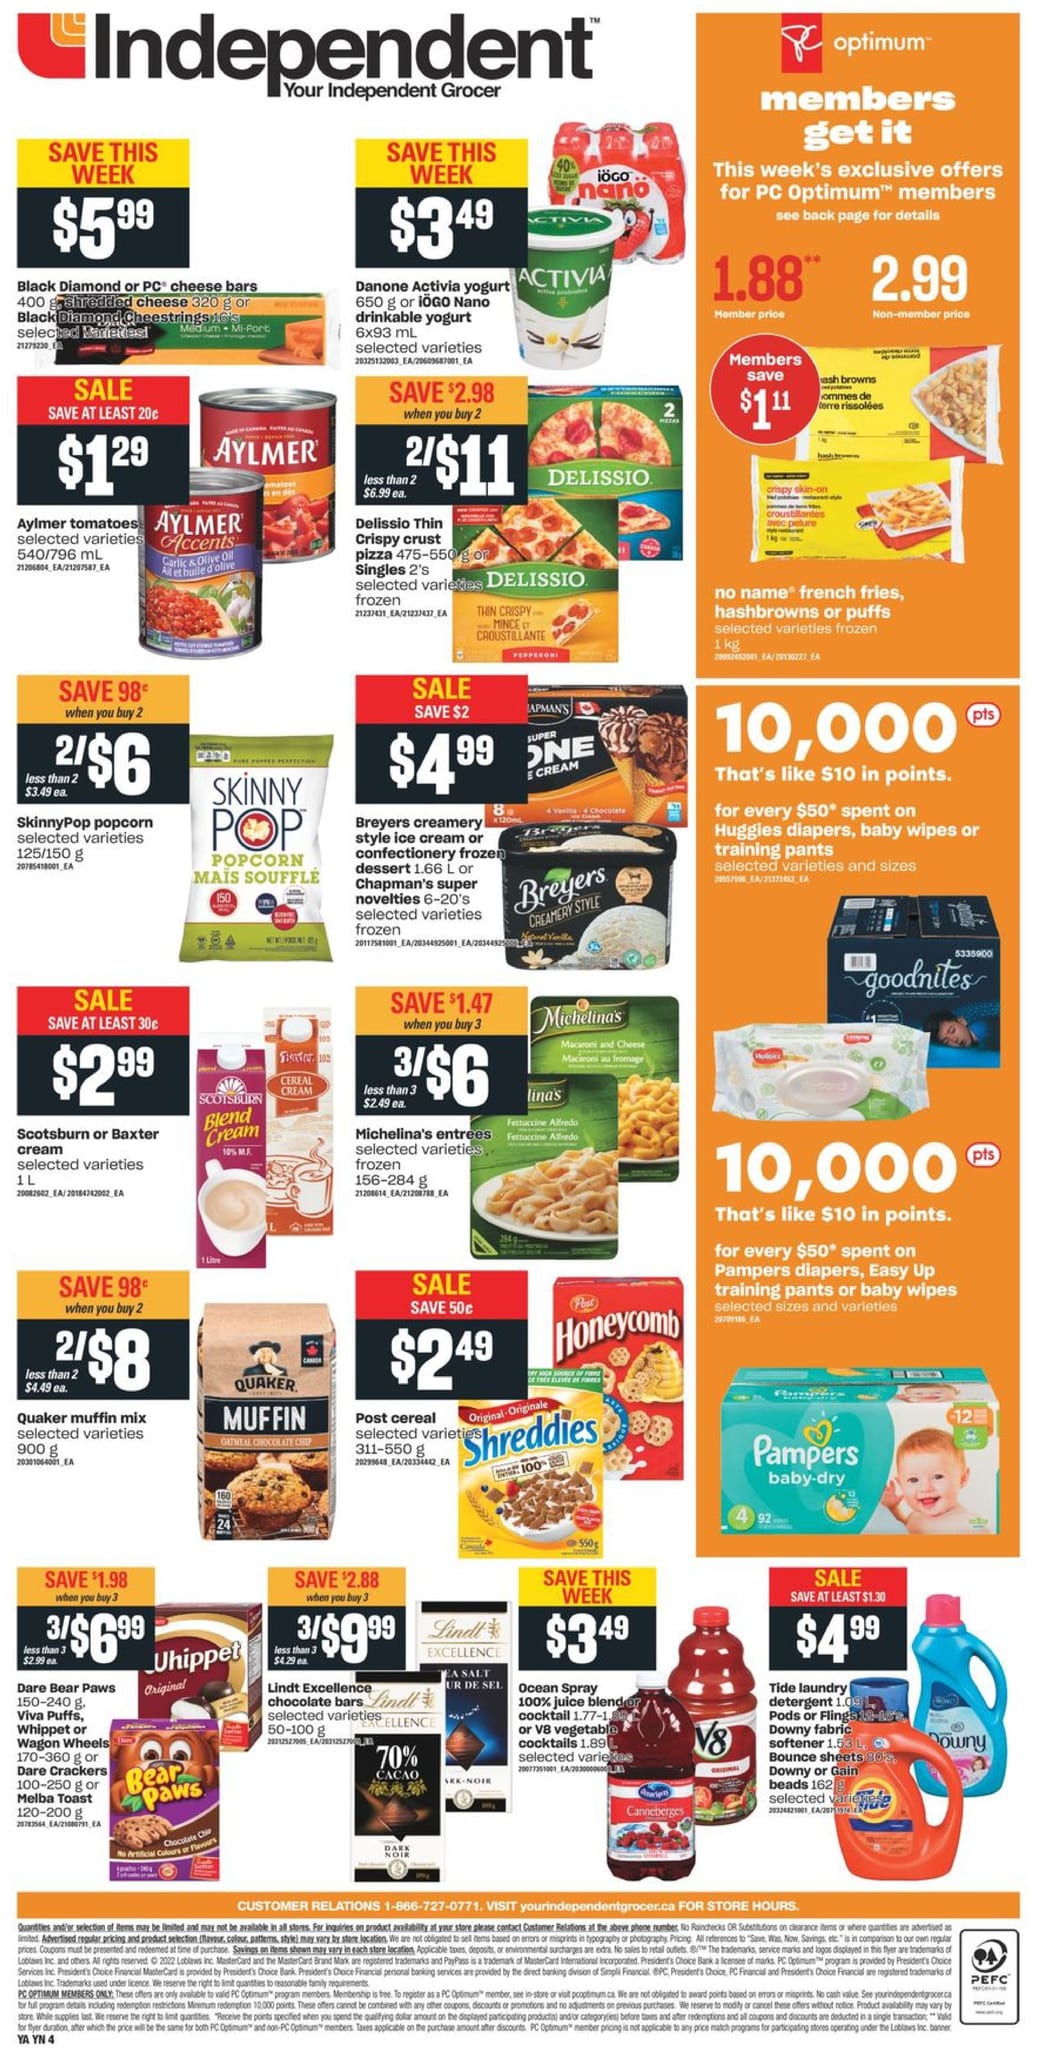 Independent Atlantic - Weekly Flyer Specials - Page 2